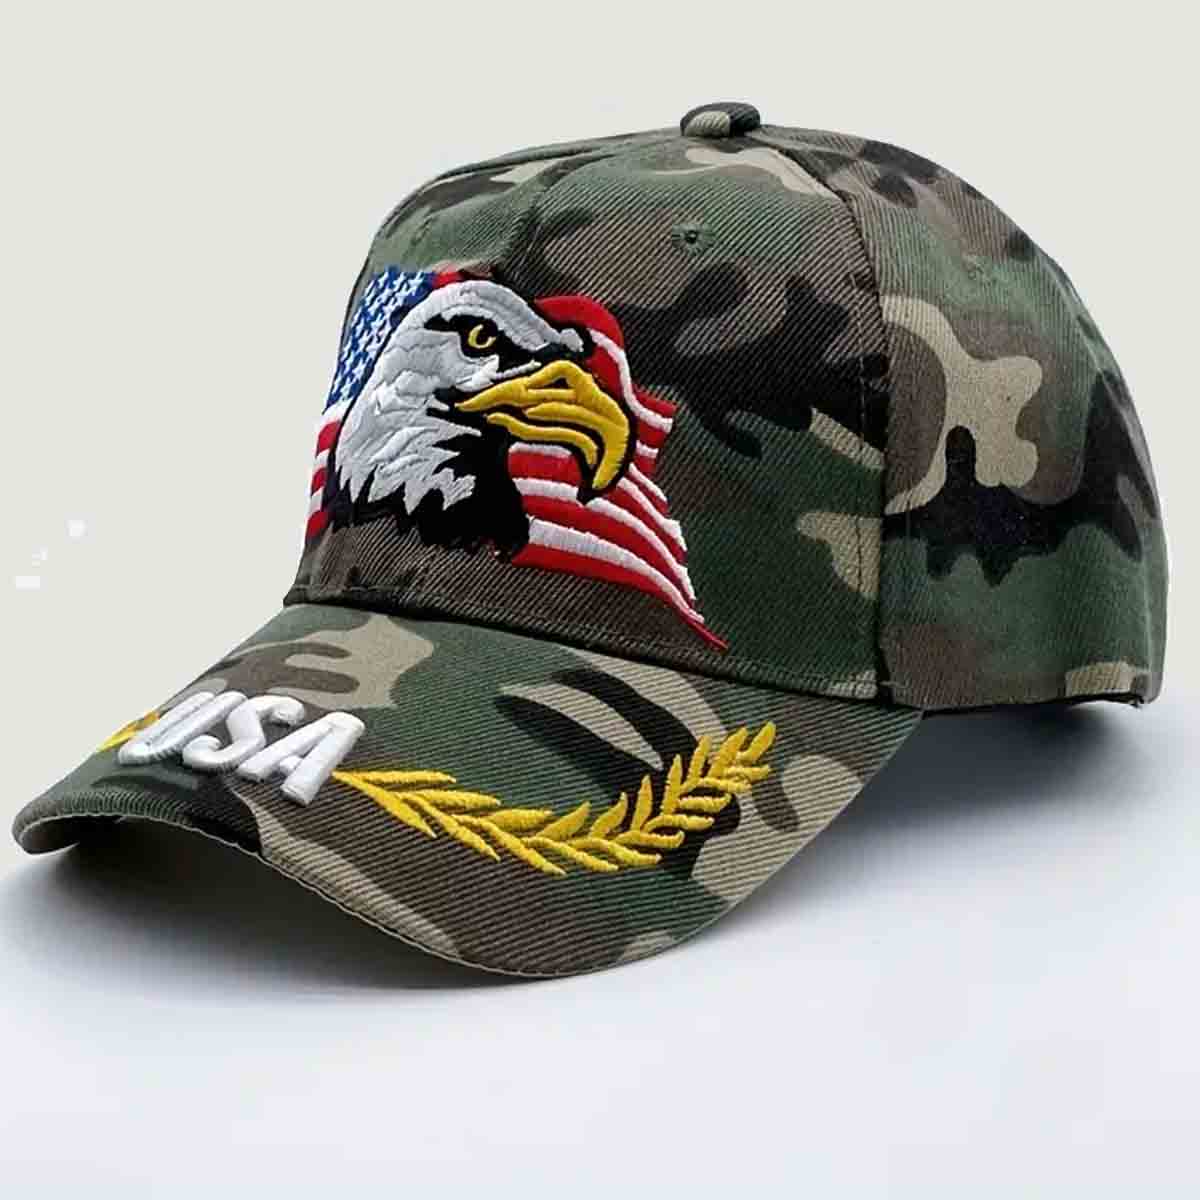 Embroidered USA Tacticle Eagle Baseball Cap designed with a camouflage pattern and an embroidered USA eagle, making it a perfect accessory for any casual event. American Outfitters Patriot Apparel. The American Clothing Company. Patriot Gear USA.